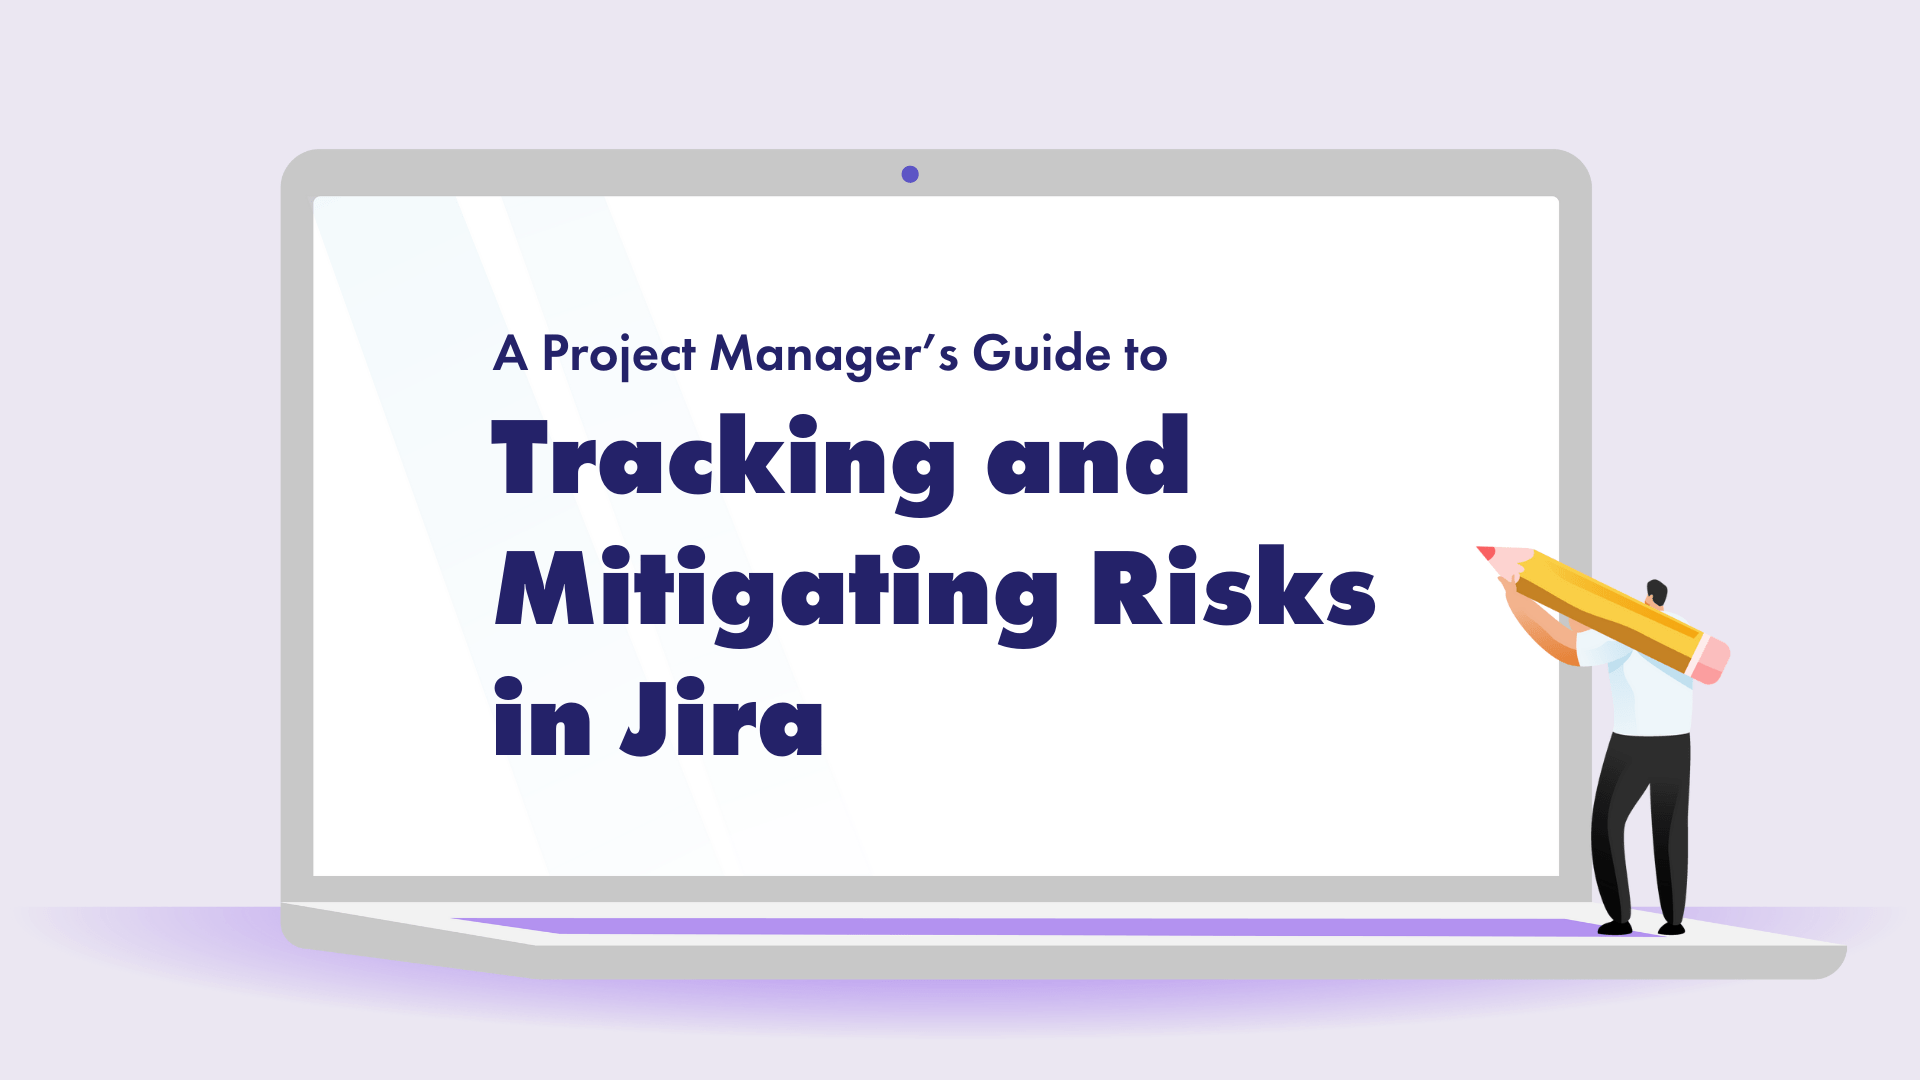 A PM’s Guide to Tracking and Mitigating Risks in Jira